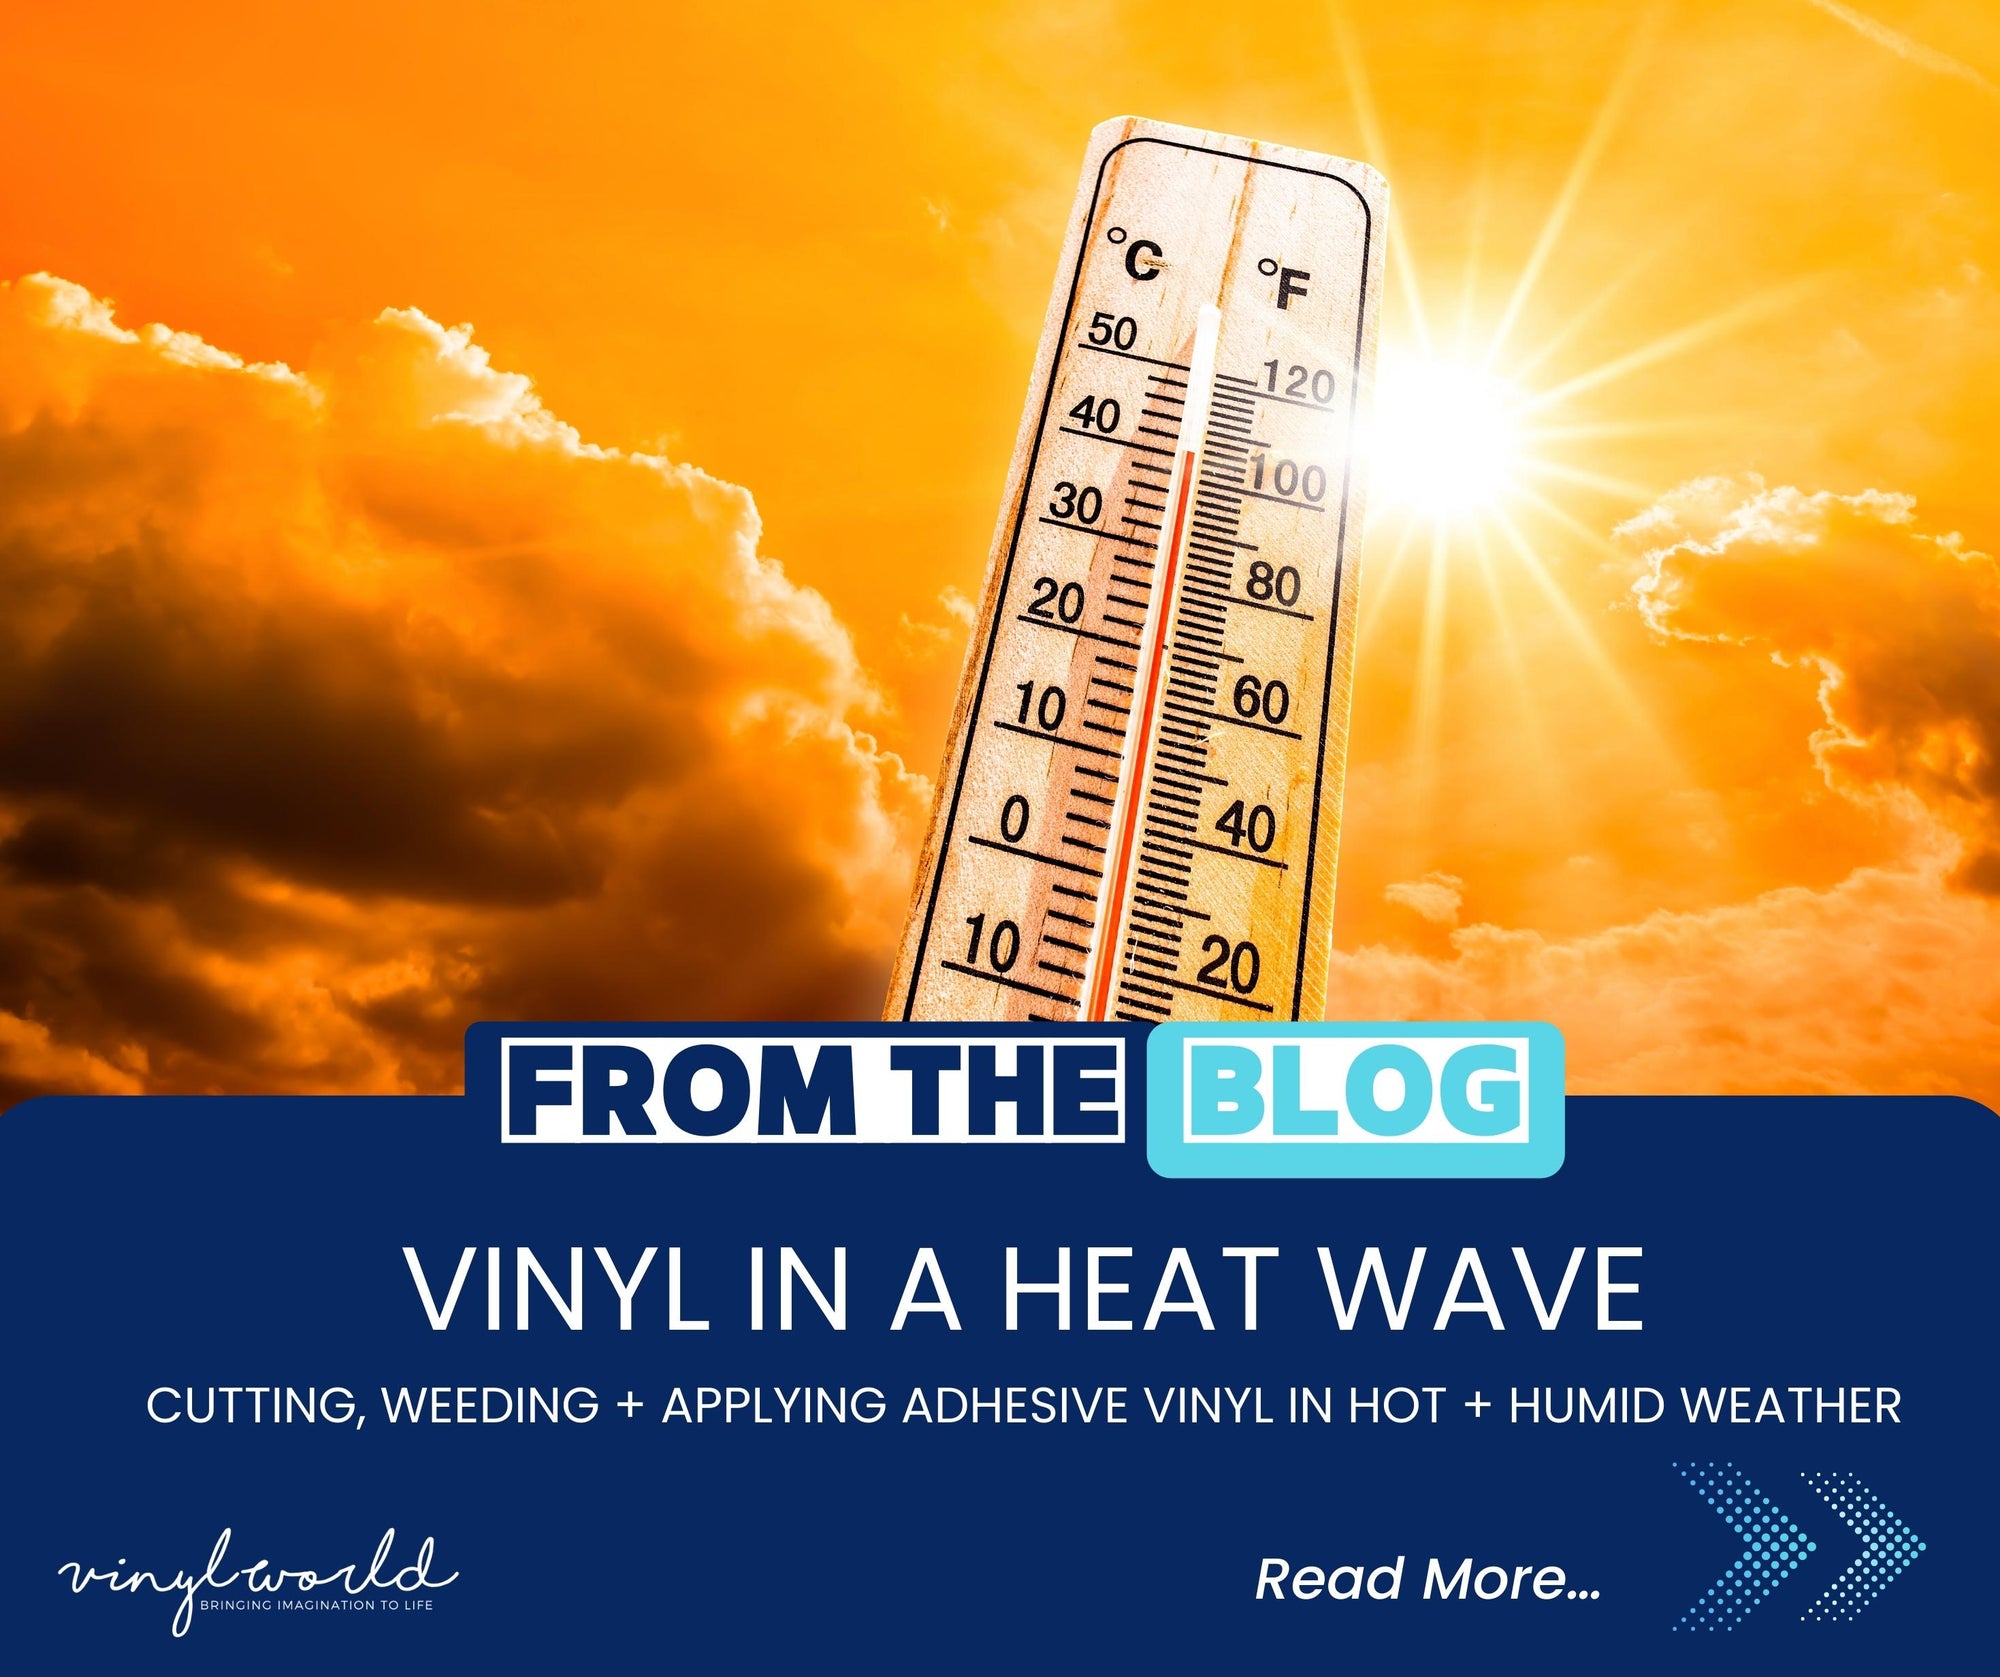 Vinyl in a Heat Wave: How to Keep Your Cool When the Weather's Hot and Humid